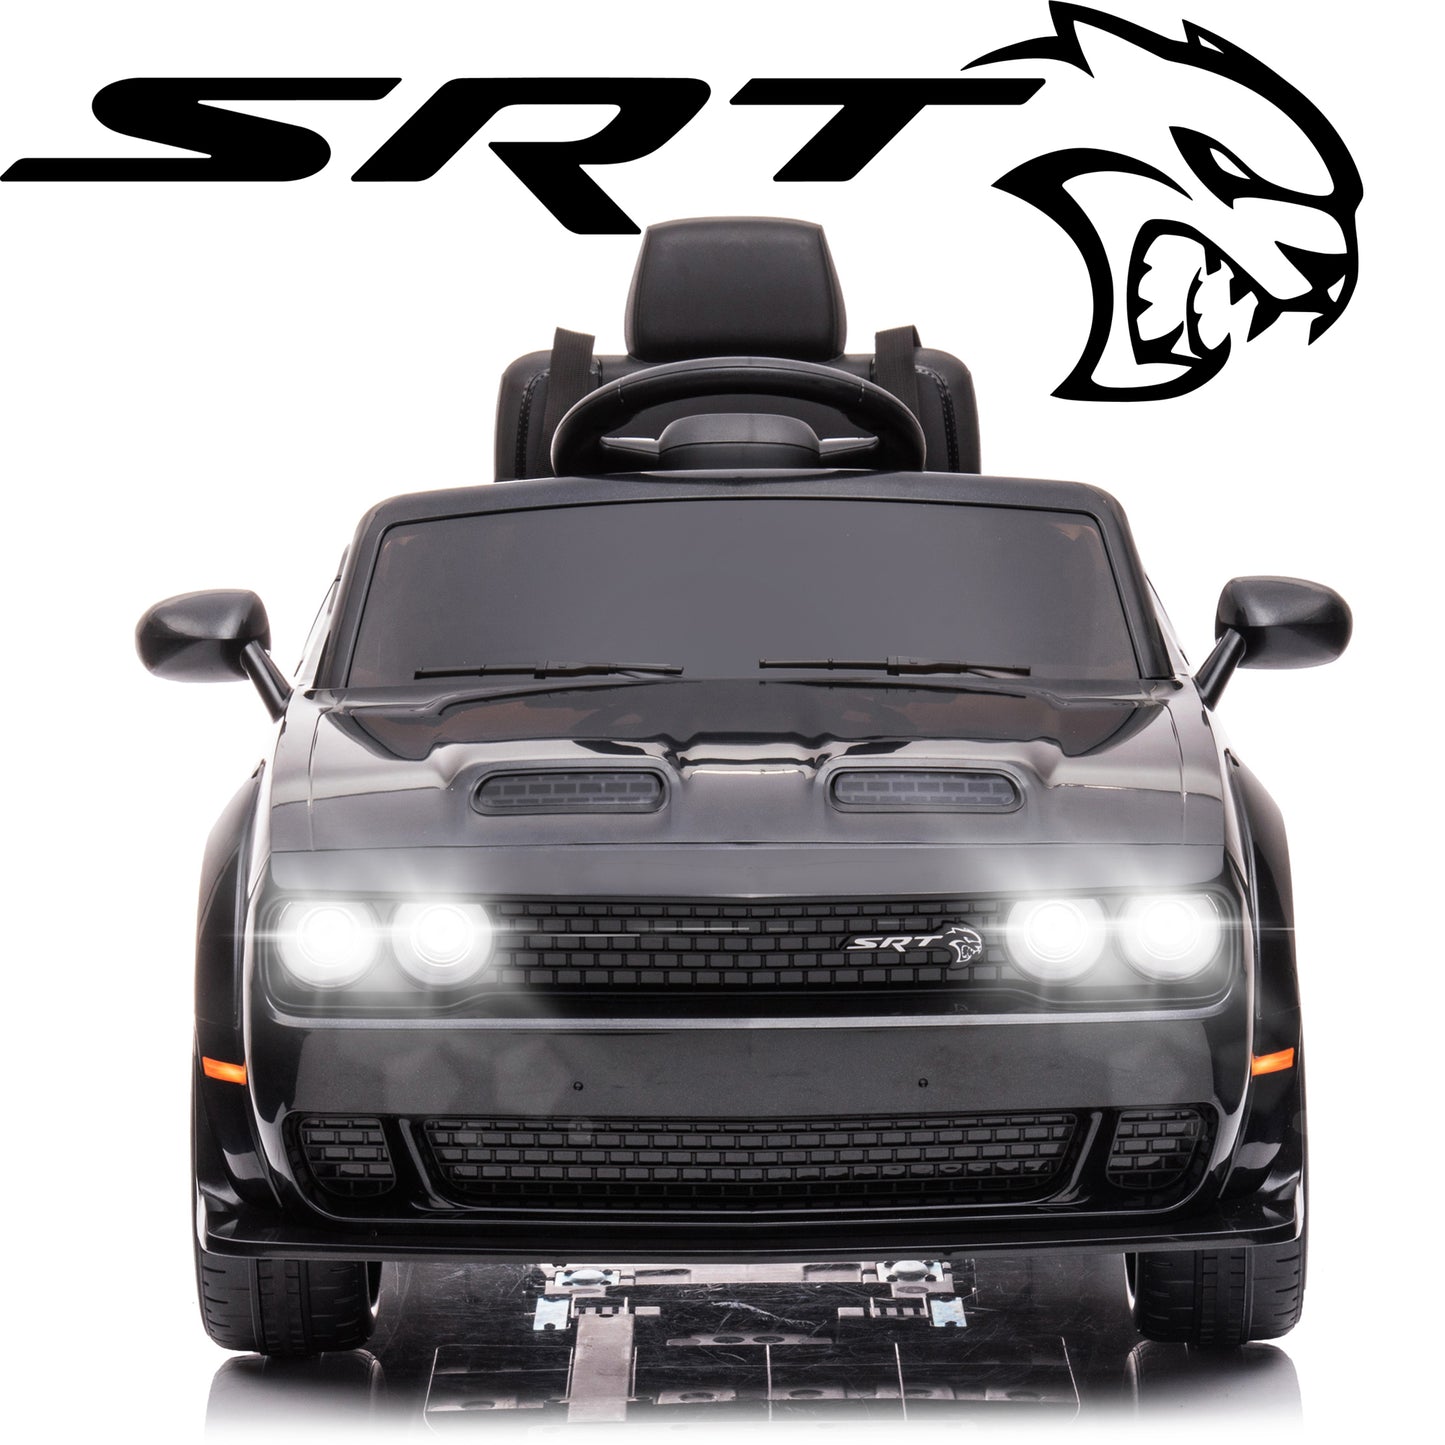 12V Licensed Dodge Challenger SRT Ride on Car for Kids, Battery Powered Ride on Toy with Remote Control, Bluetooth and LED Lights, Electric Car Vehicle for Boys Girls Age 2-4, Black, Y035